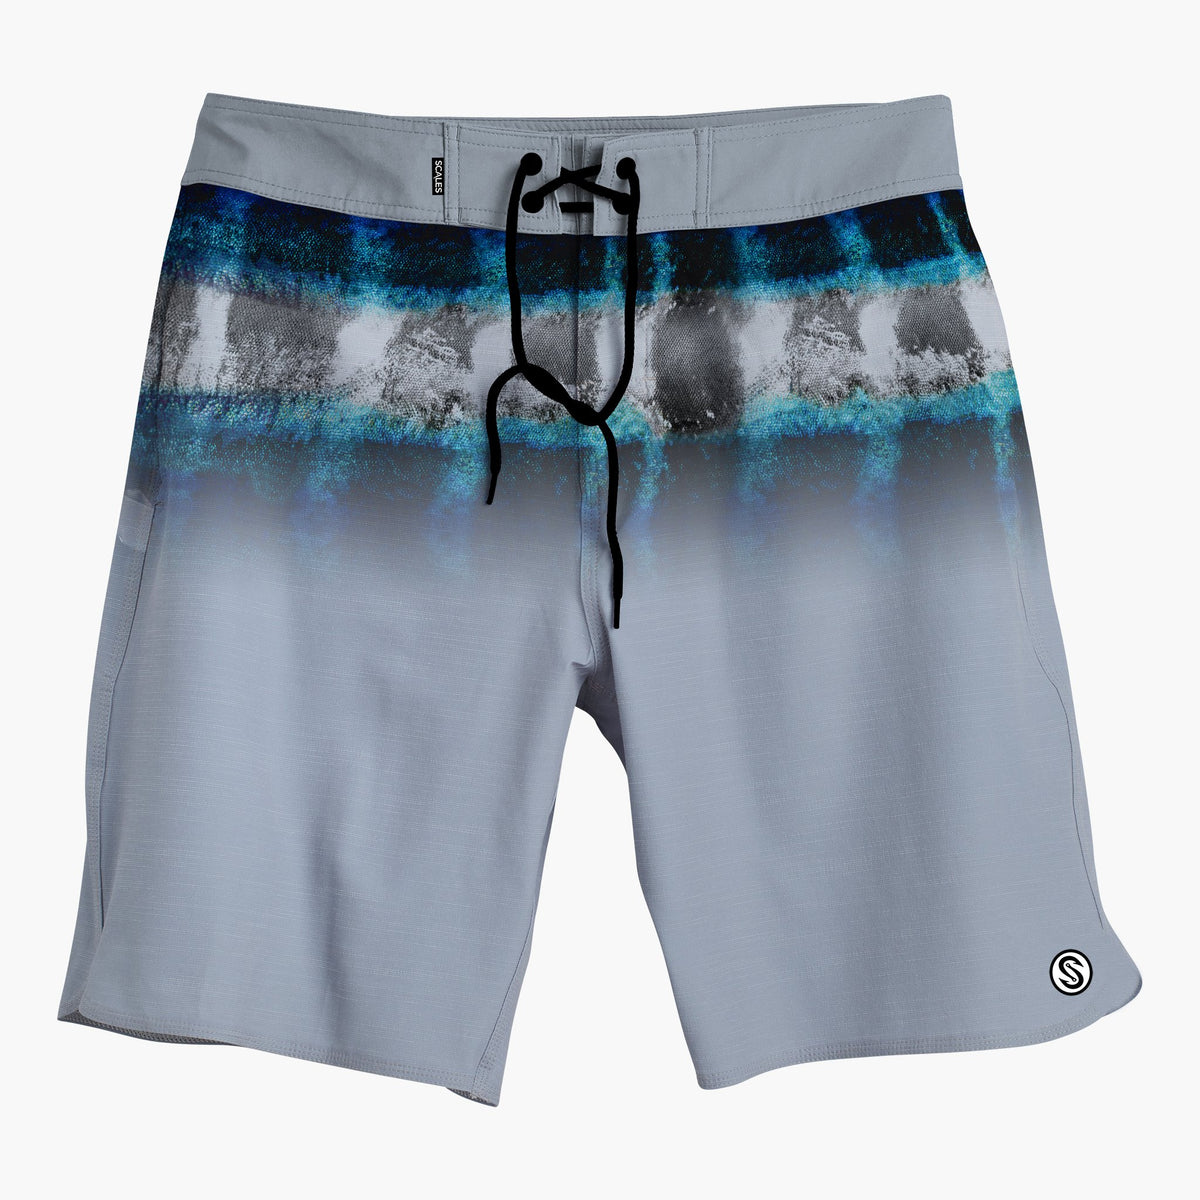 SCALES Hoo Stripes First Mates Boardshorts